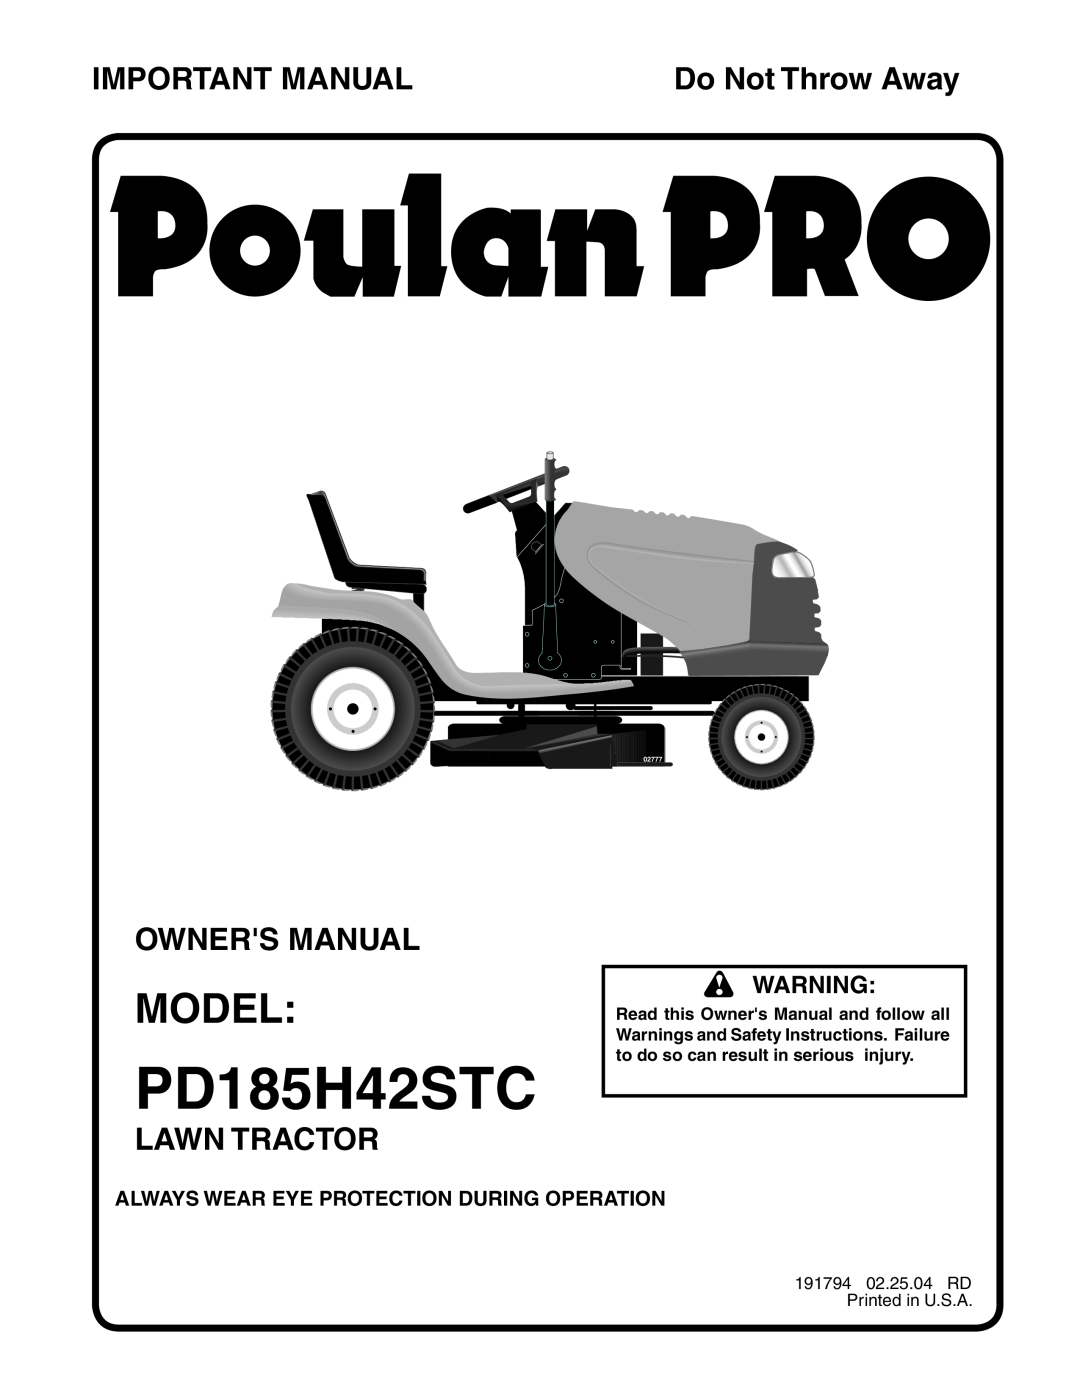 Poulan PD185H42STC owner manual Model, Important Manual, Lawn Tractor, Always Wear Eye Protection During Operation, 02777 